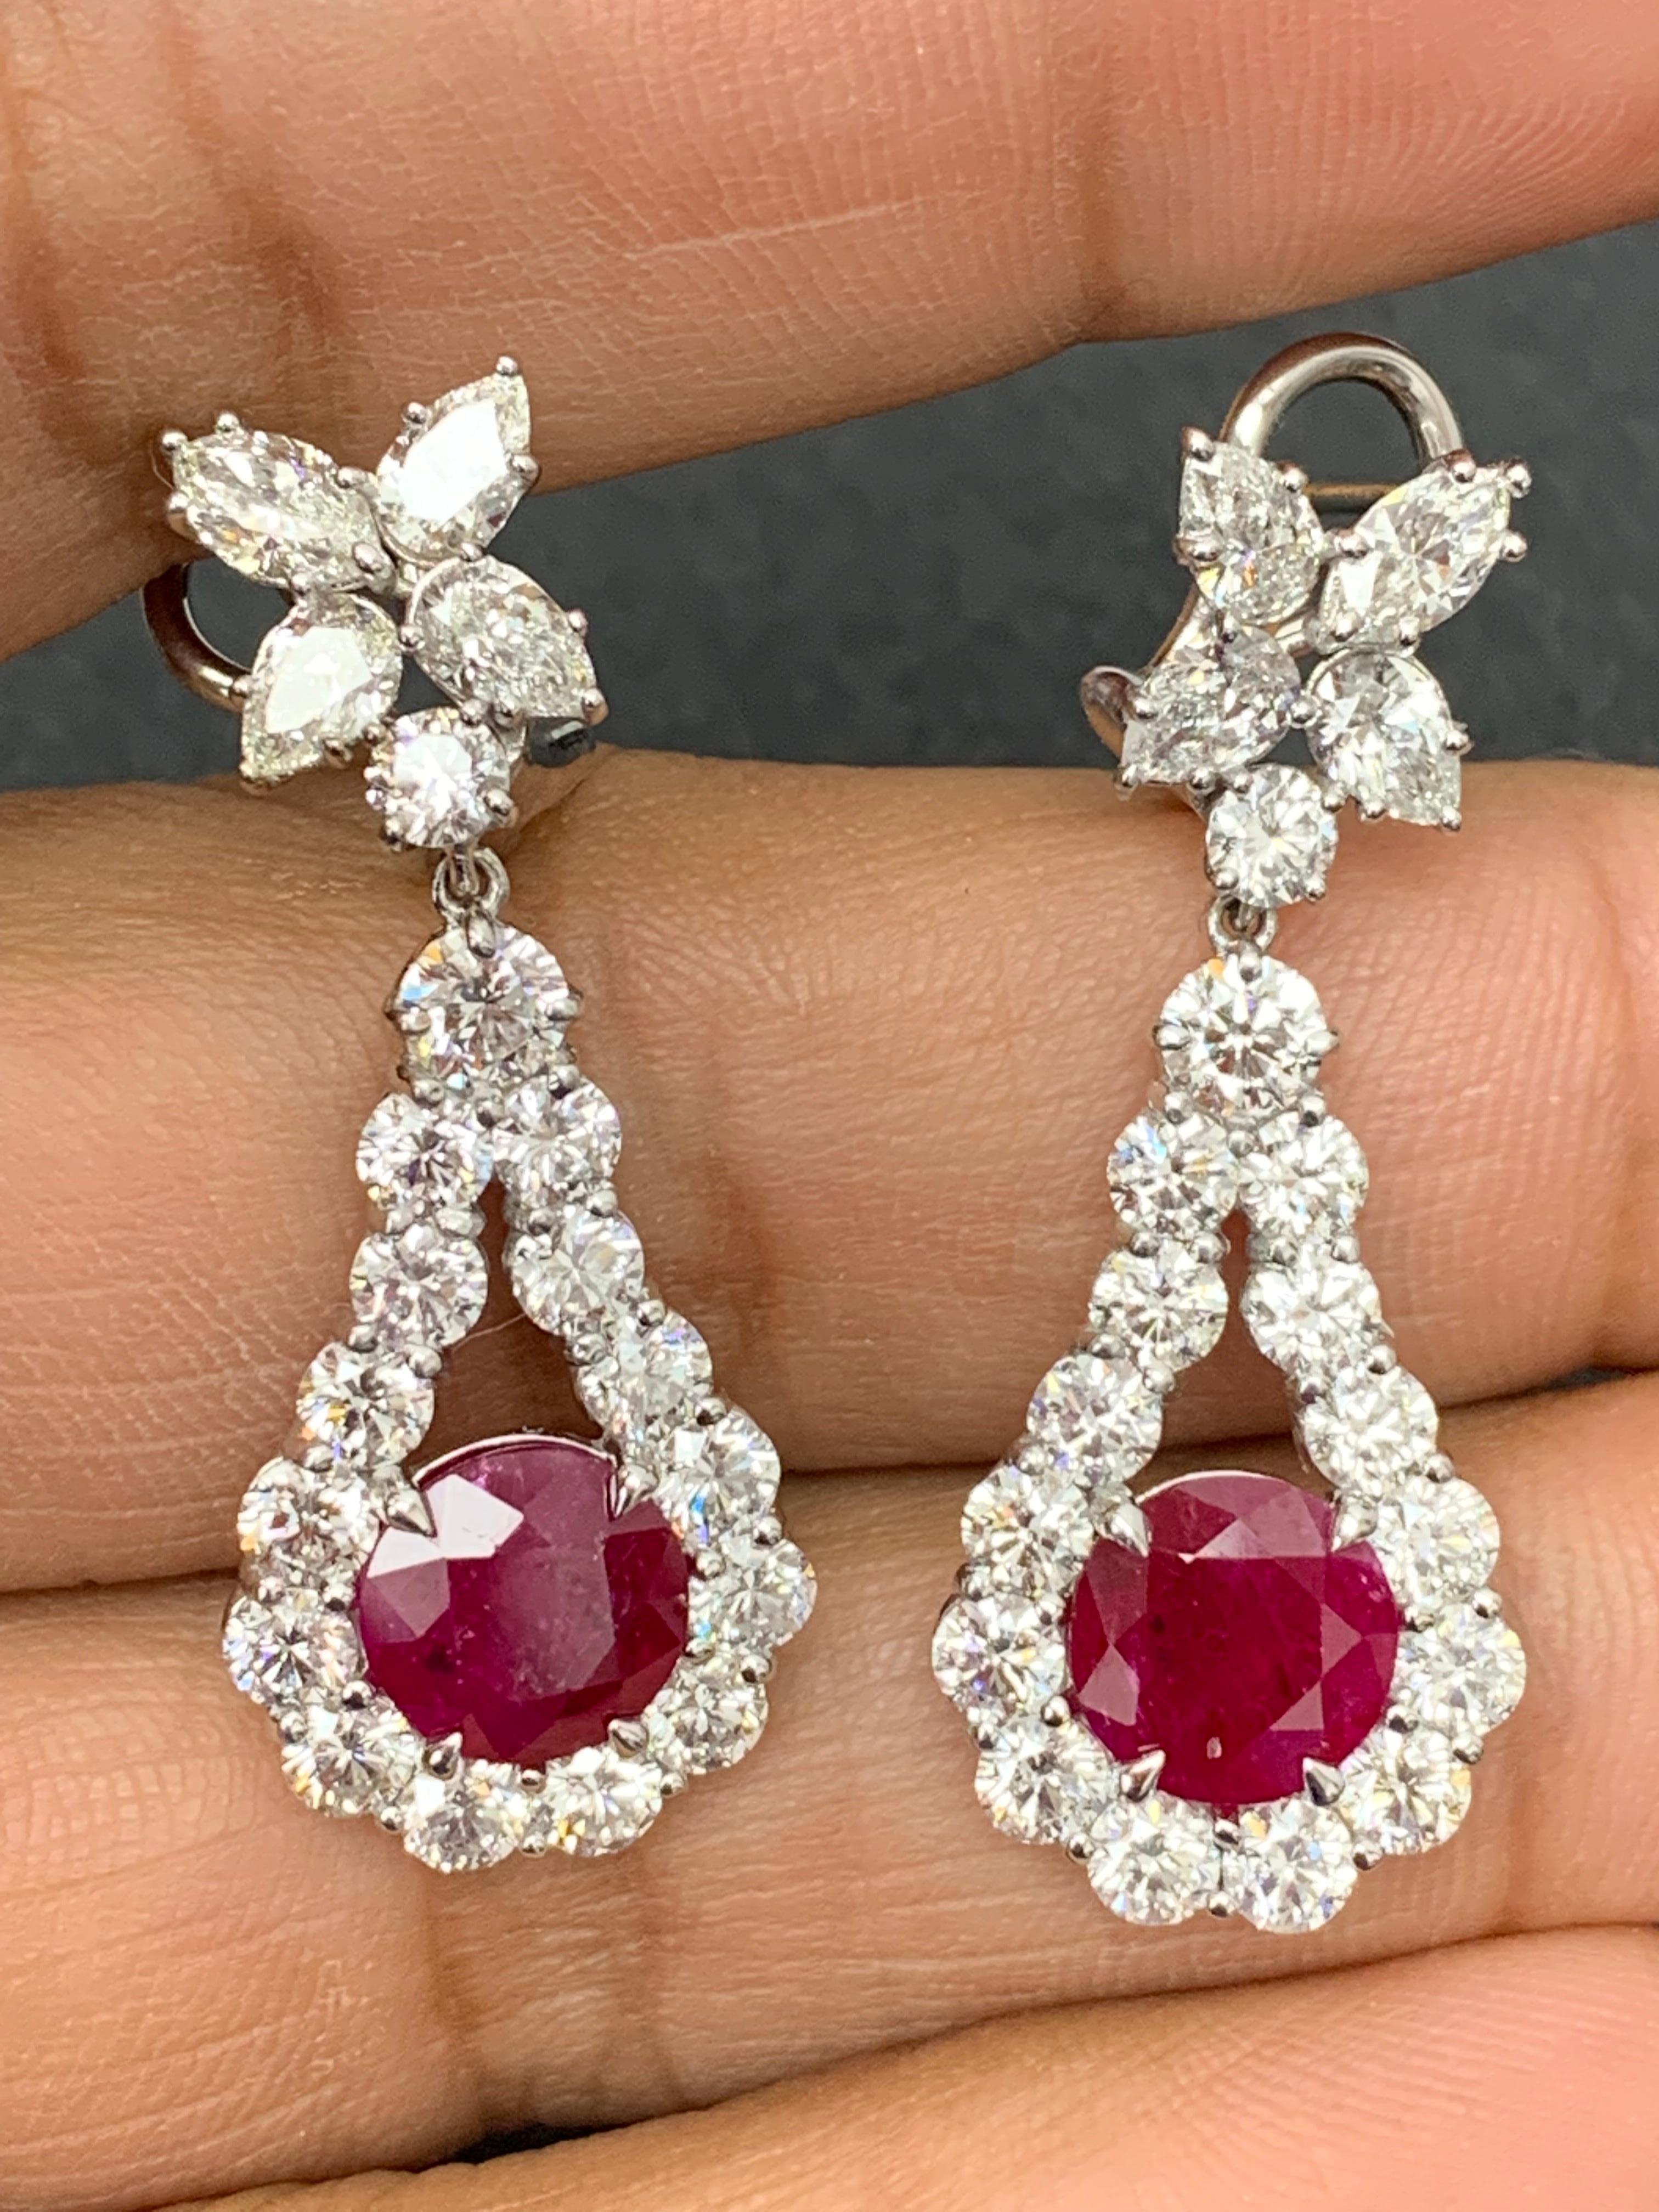 4.20 Carat Round Cut Ruby  and Diamond Drop Earrings in 18K White Gold For Sale 1